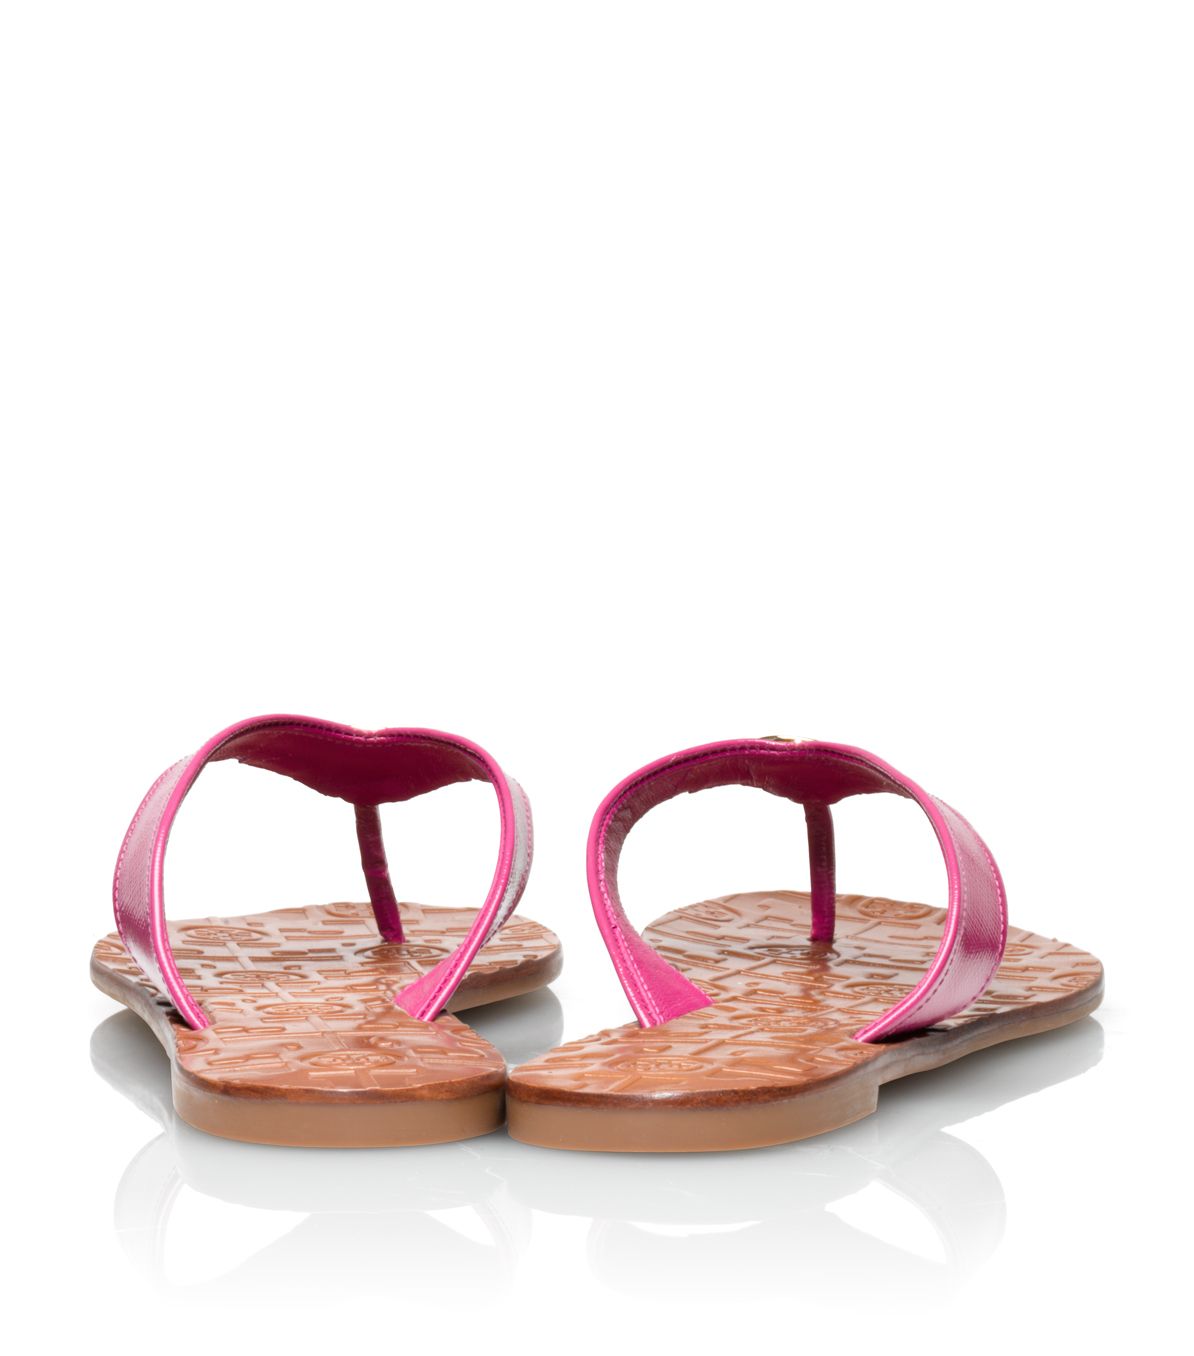 Lyst - Tory Burch Patent Leather Thora Sandal in Pink